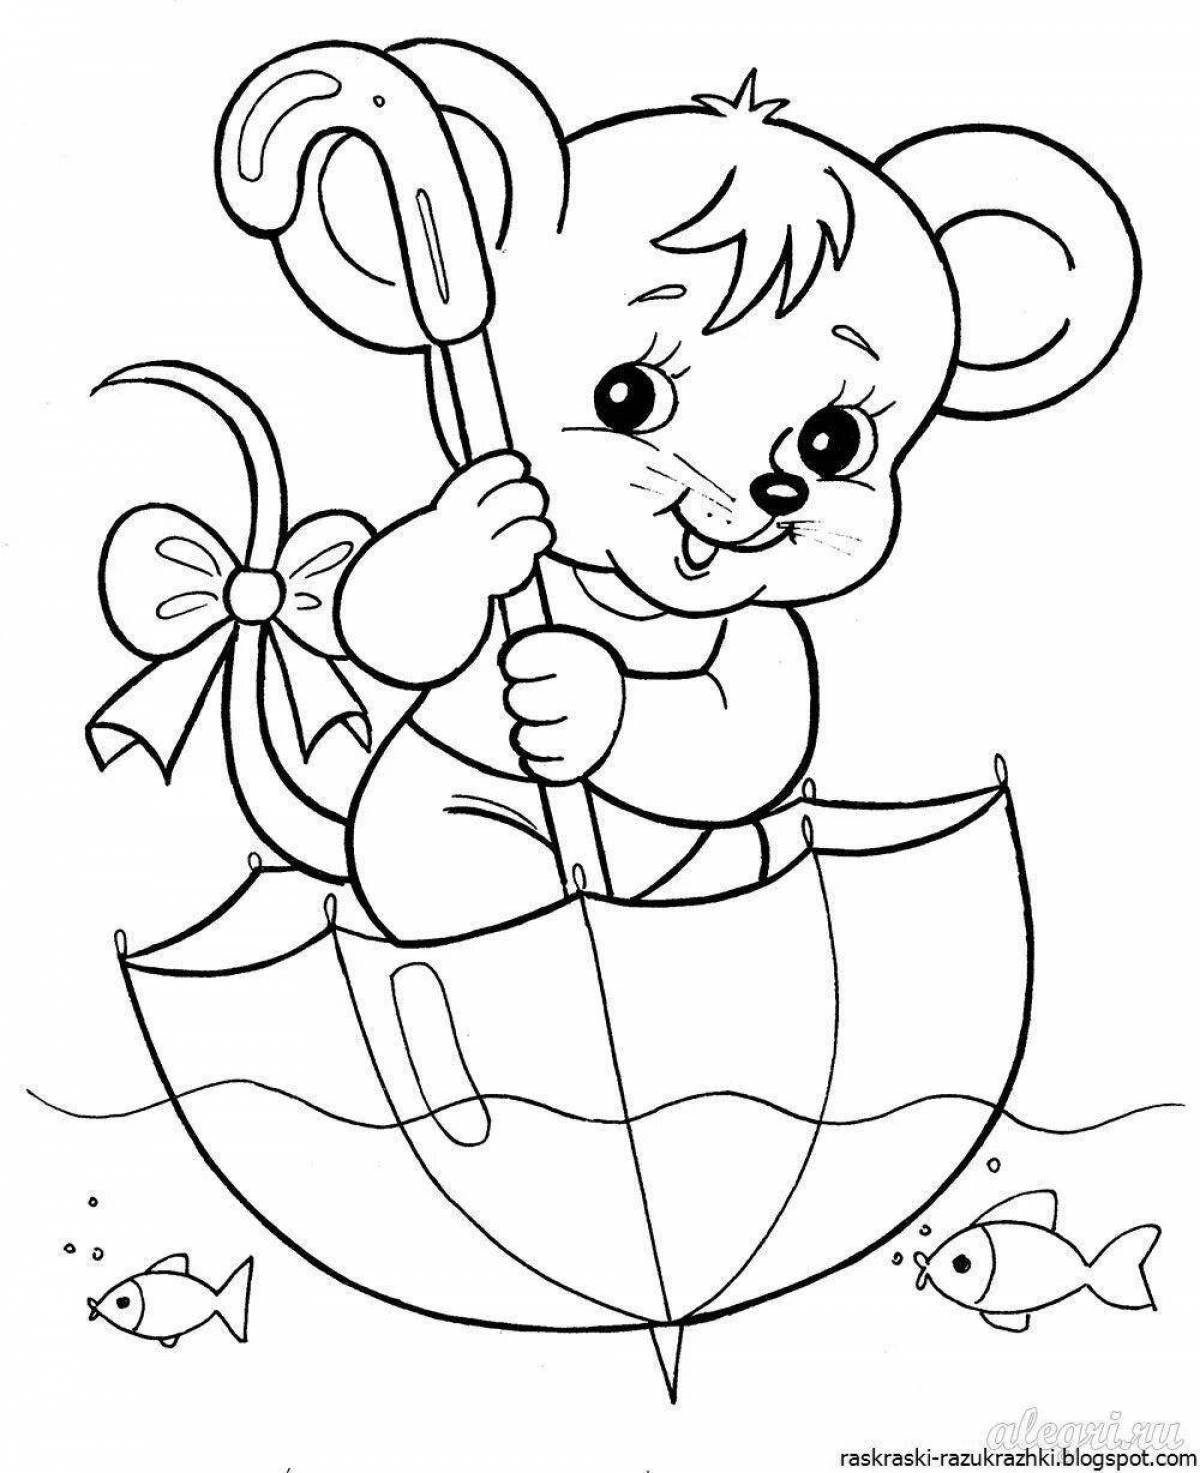 Cute coloring book for toddler girls